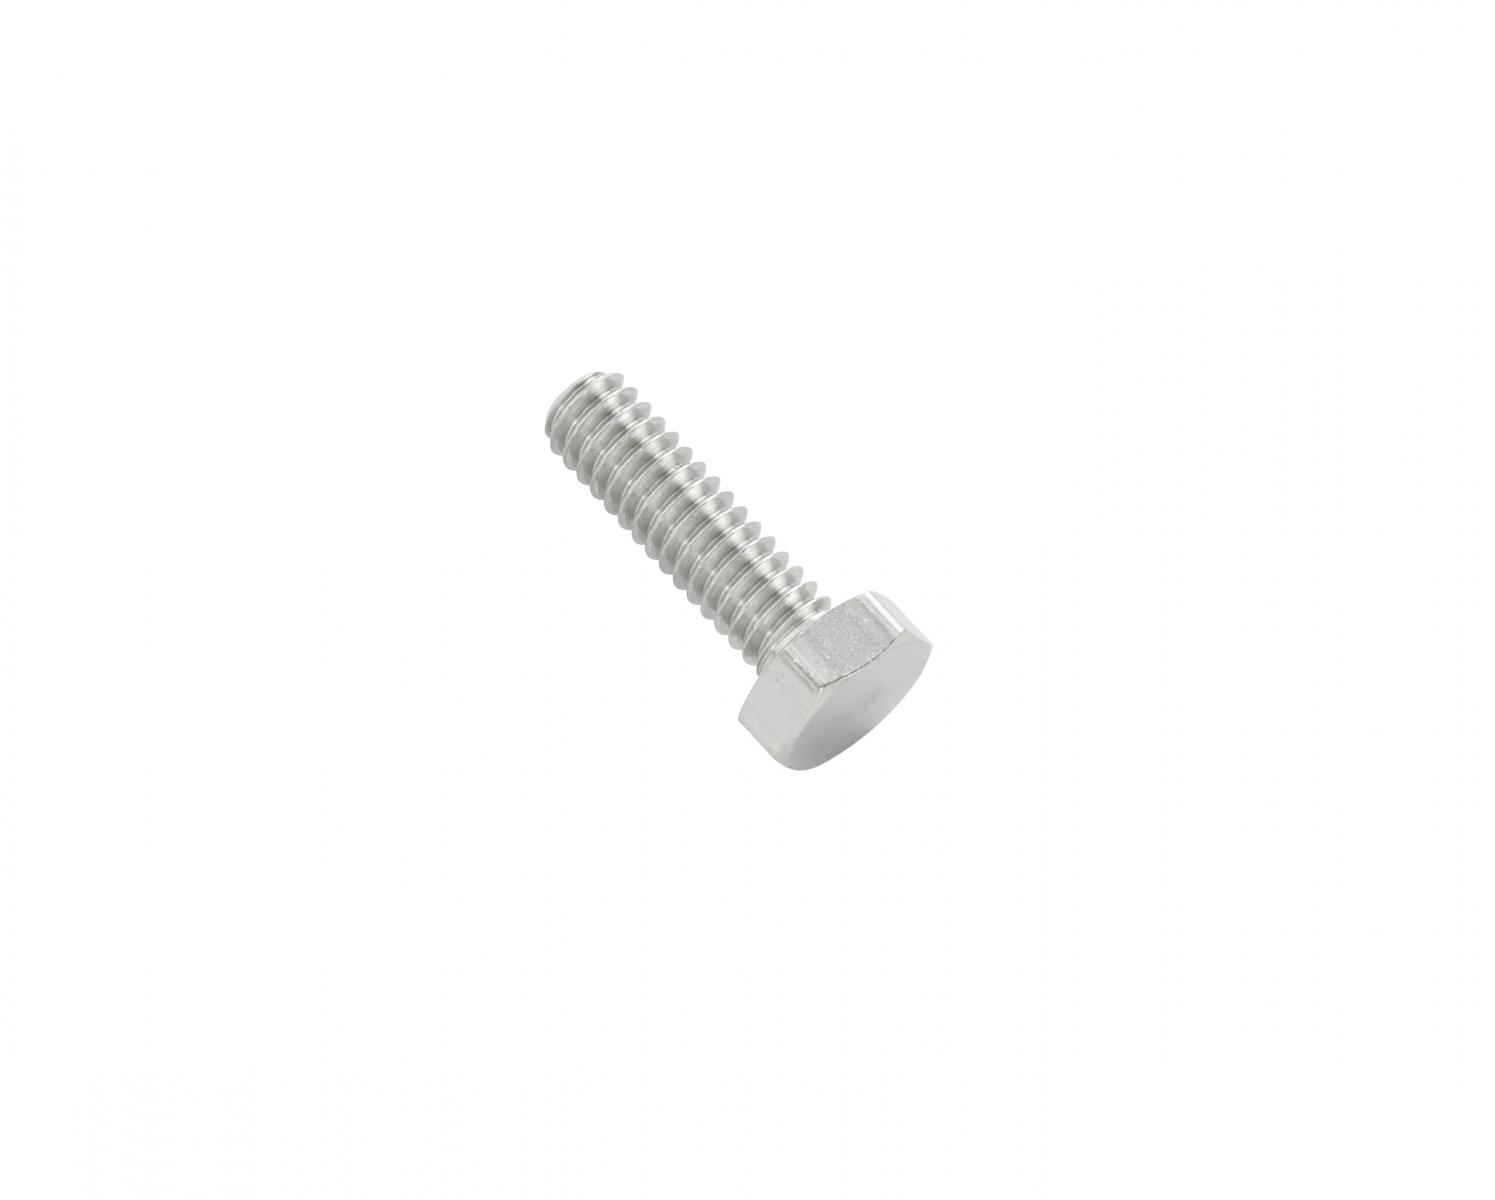 TapeTech® Slotted Cup Bolt. Part number 050205